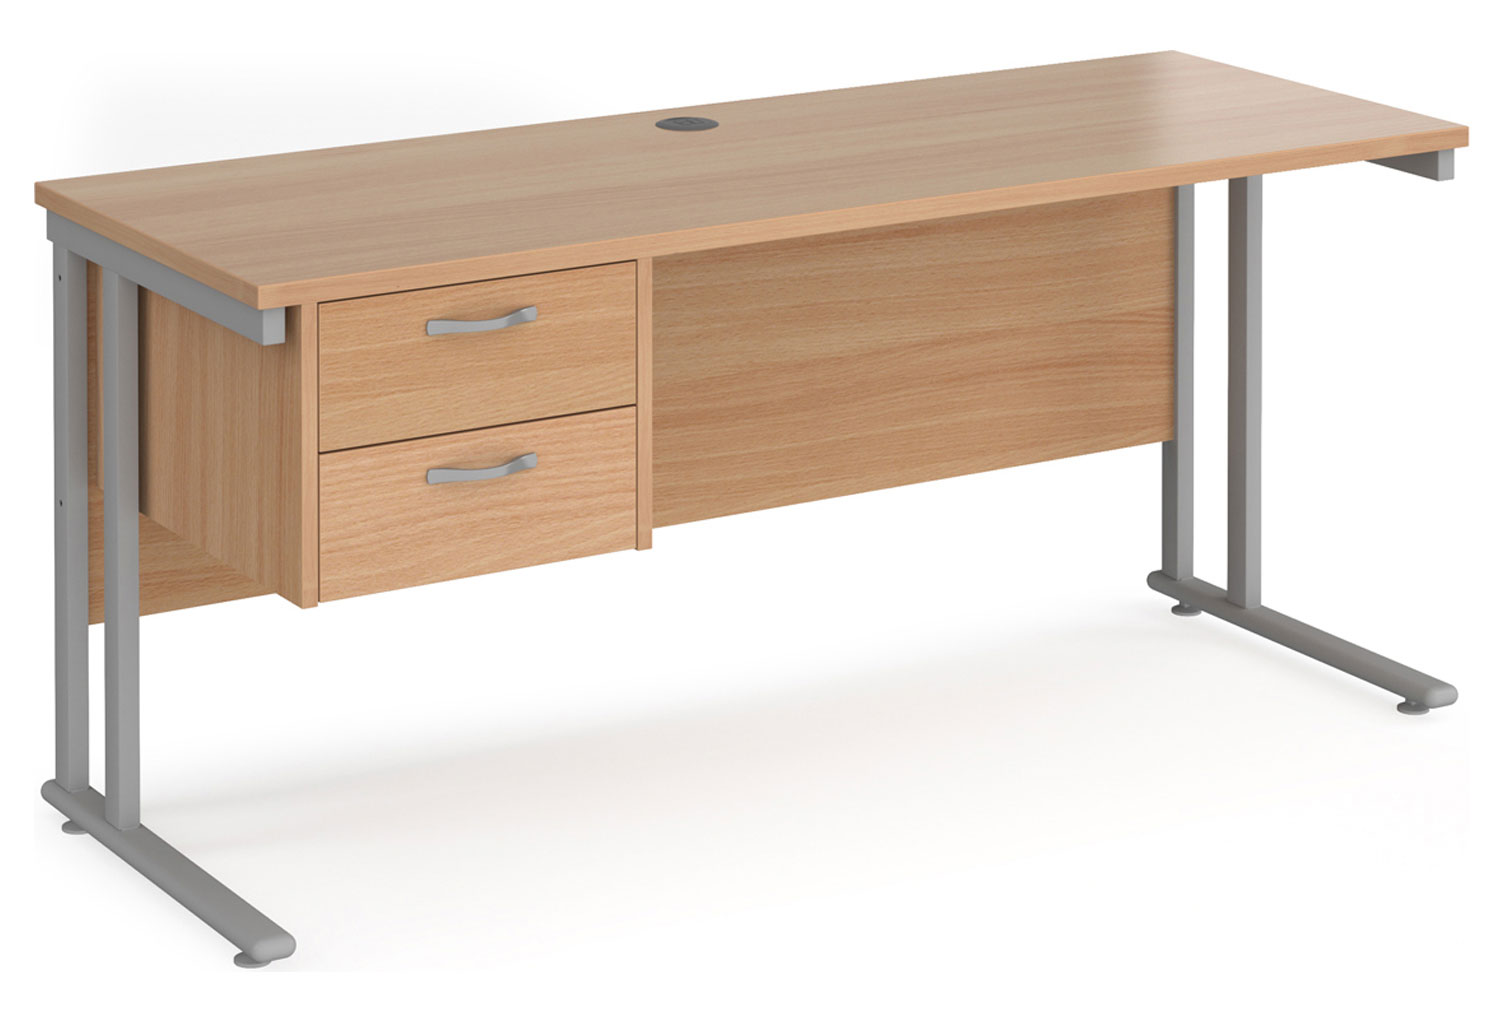 Value Line Deluxe C-Leg Narrow Rectangular Office Desk 2 Drawers (Silver Legs), 160w60dx73h (cm), Beech, Express Delivery